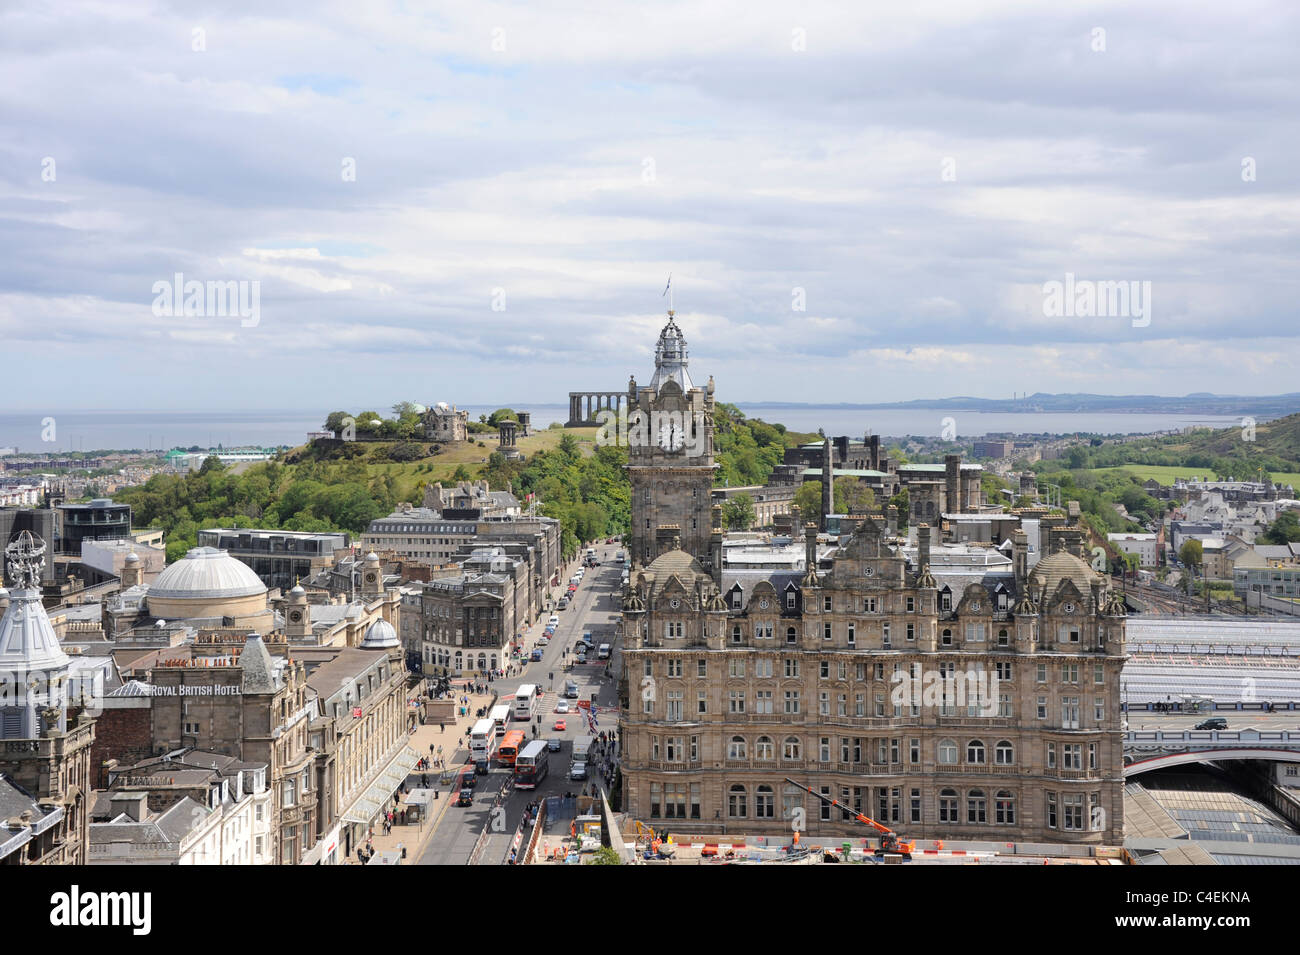 The Balmoral Hotel, Princes Street, Edinburgh, Scotland. In the distance is Calton Hill and the Firth of Forth on the horizon Stock Photo